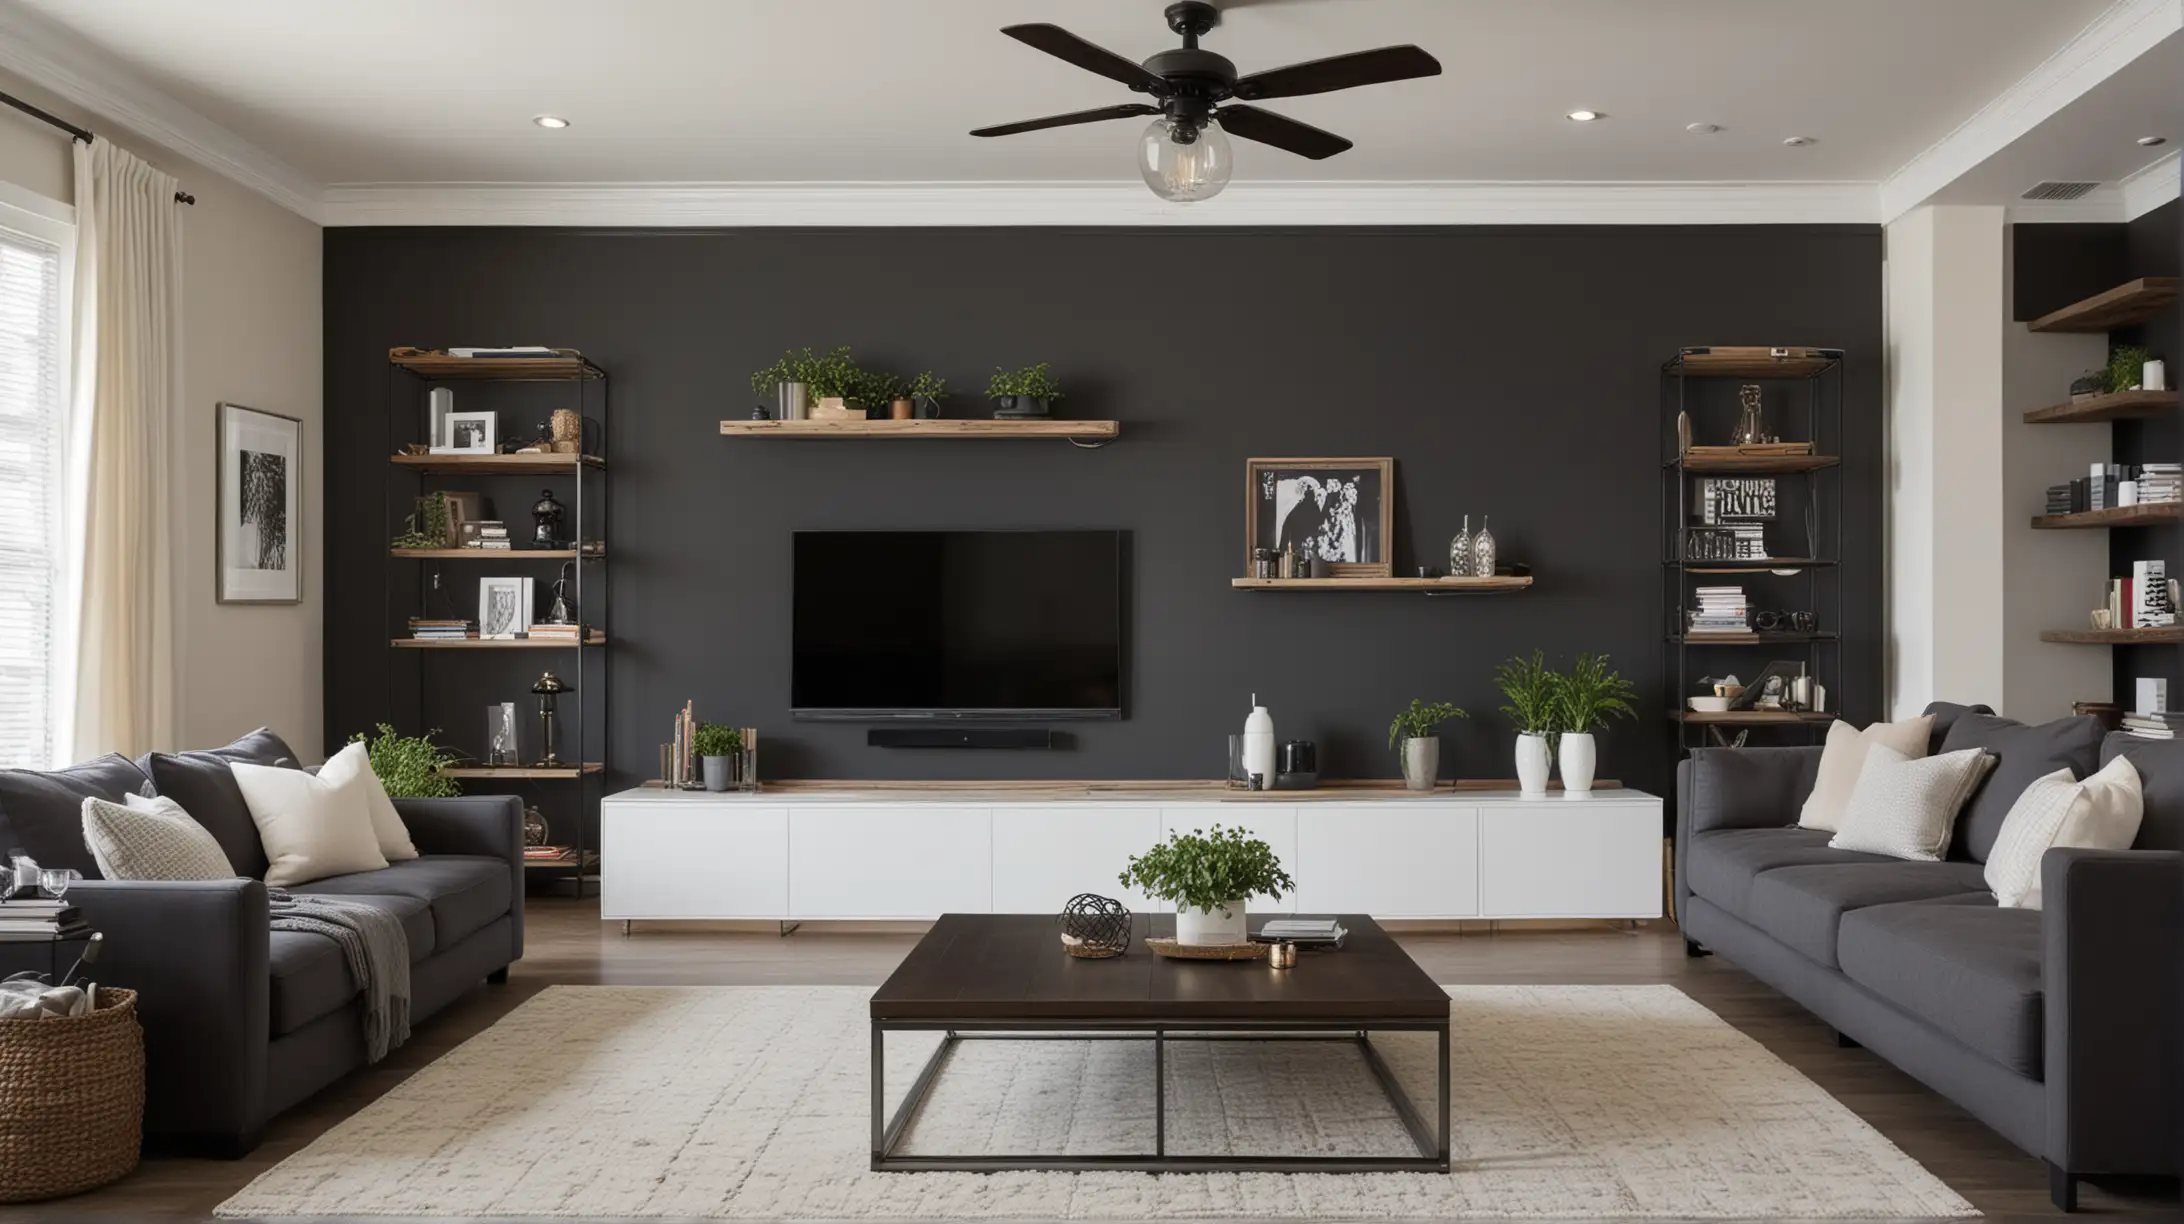 A large living room that has light painted walls, wood floors, white metal pipe and light wood for shelving, an white area rug. Dark wood, dark paint. Flat TV on the wall, small table with a lamp, couch. cream, white, black, gray 


